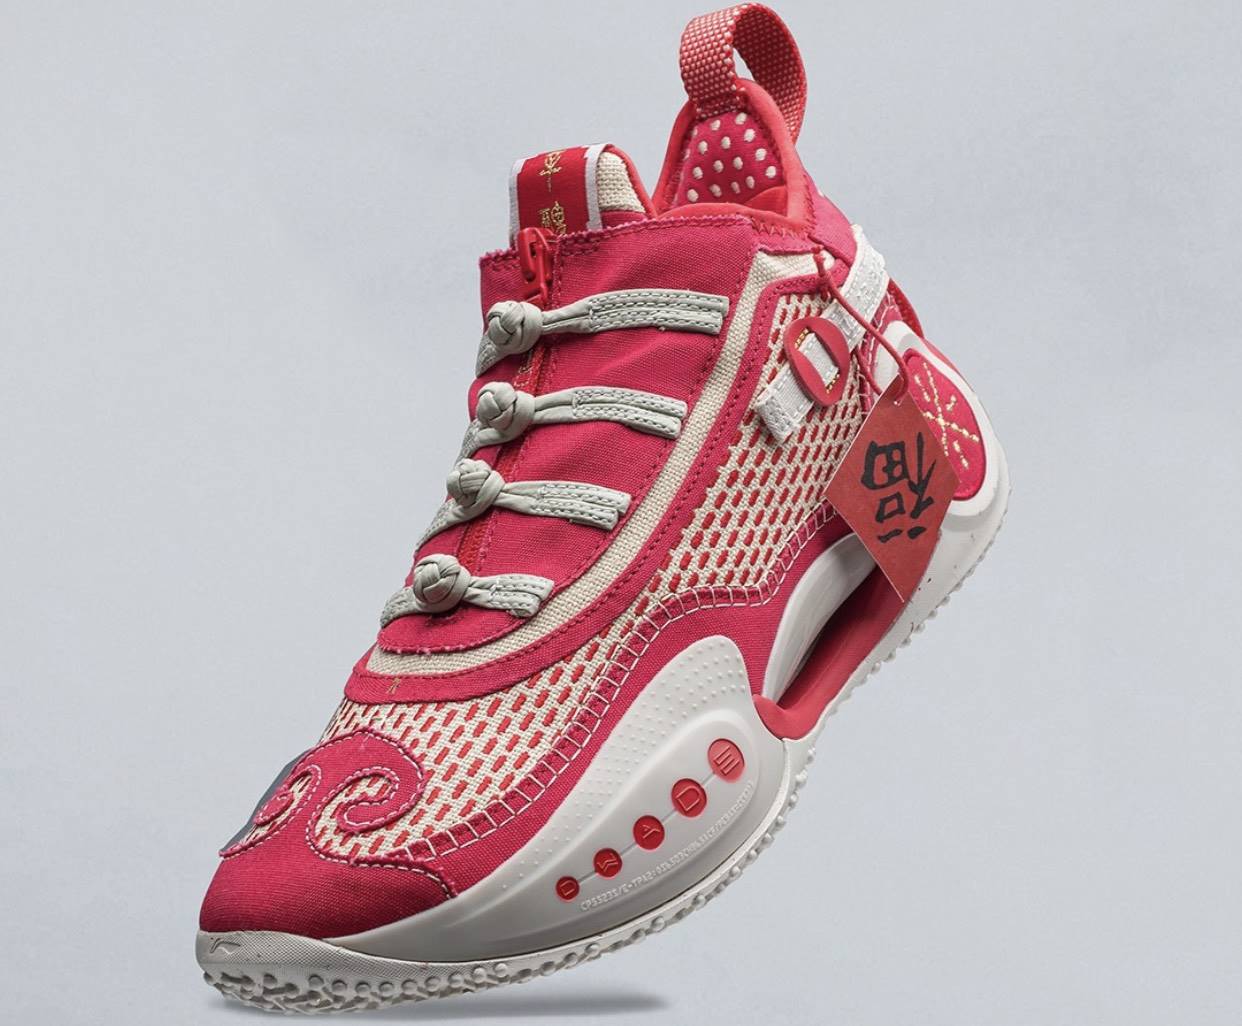 participate Converge Mount Bank Li-Ning teases limited edition Way of Wade shoes - sportstextiles